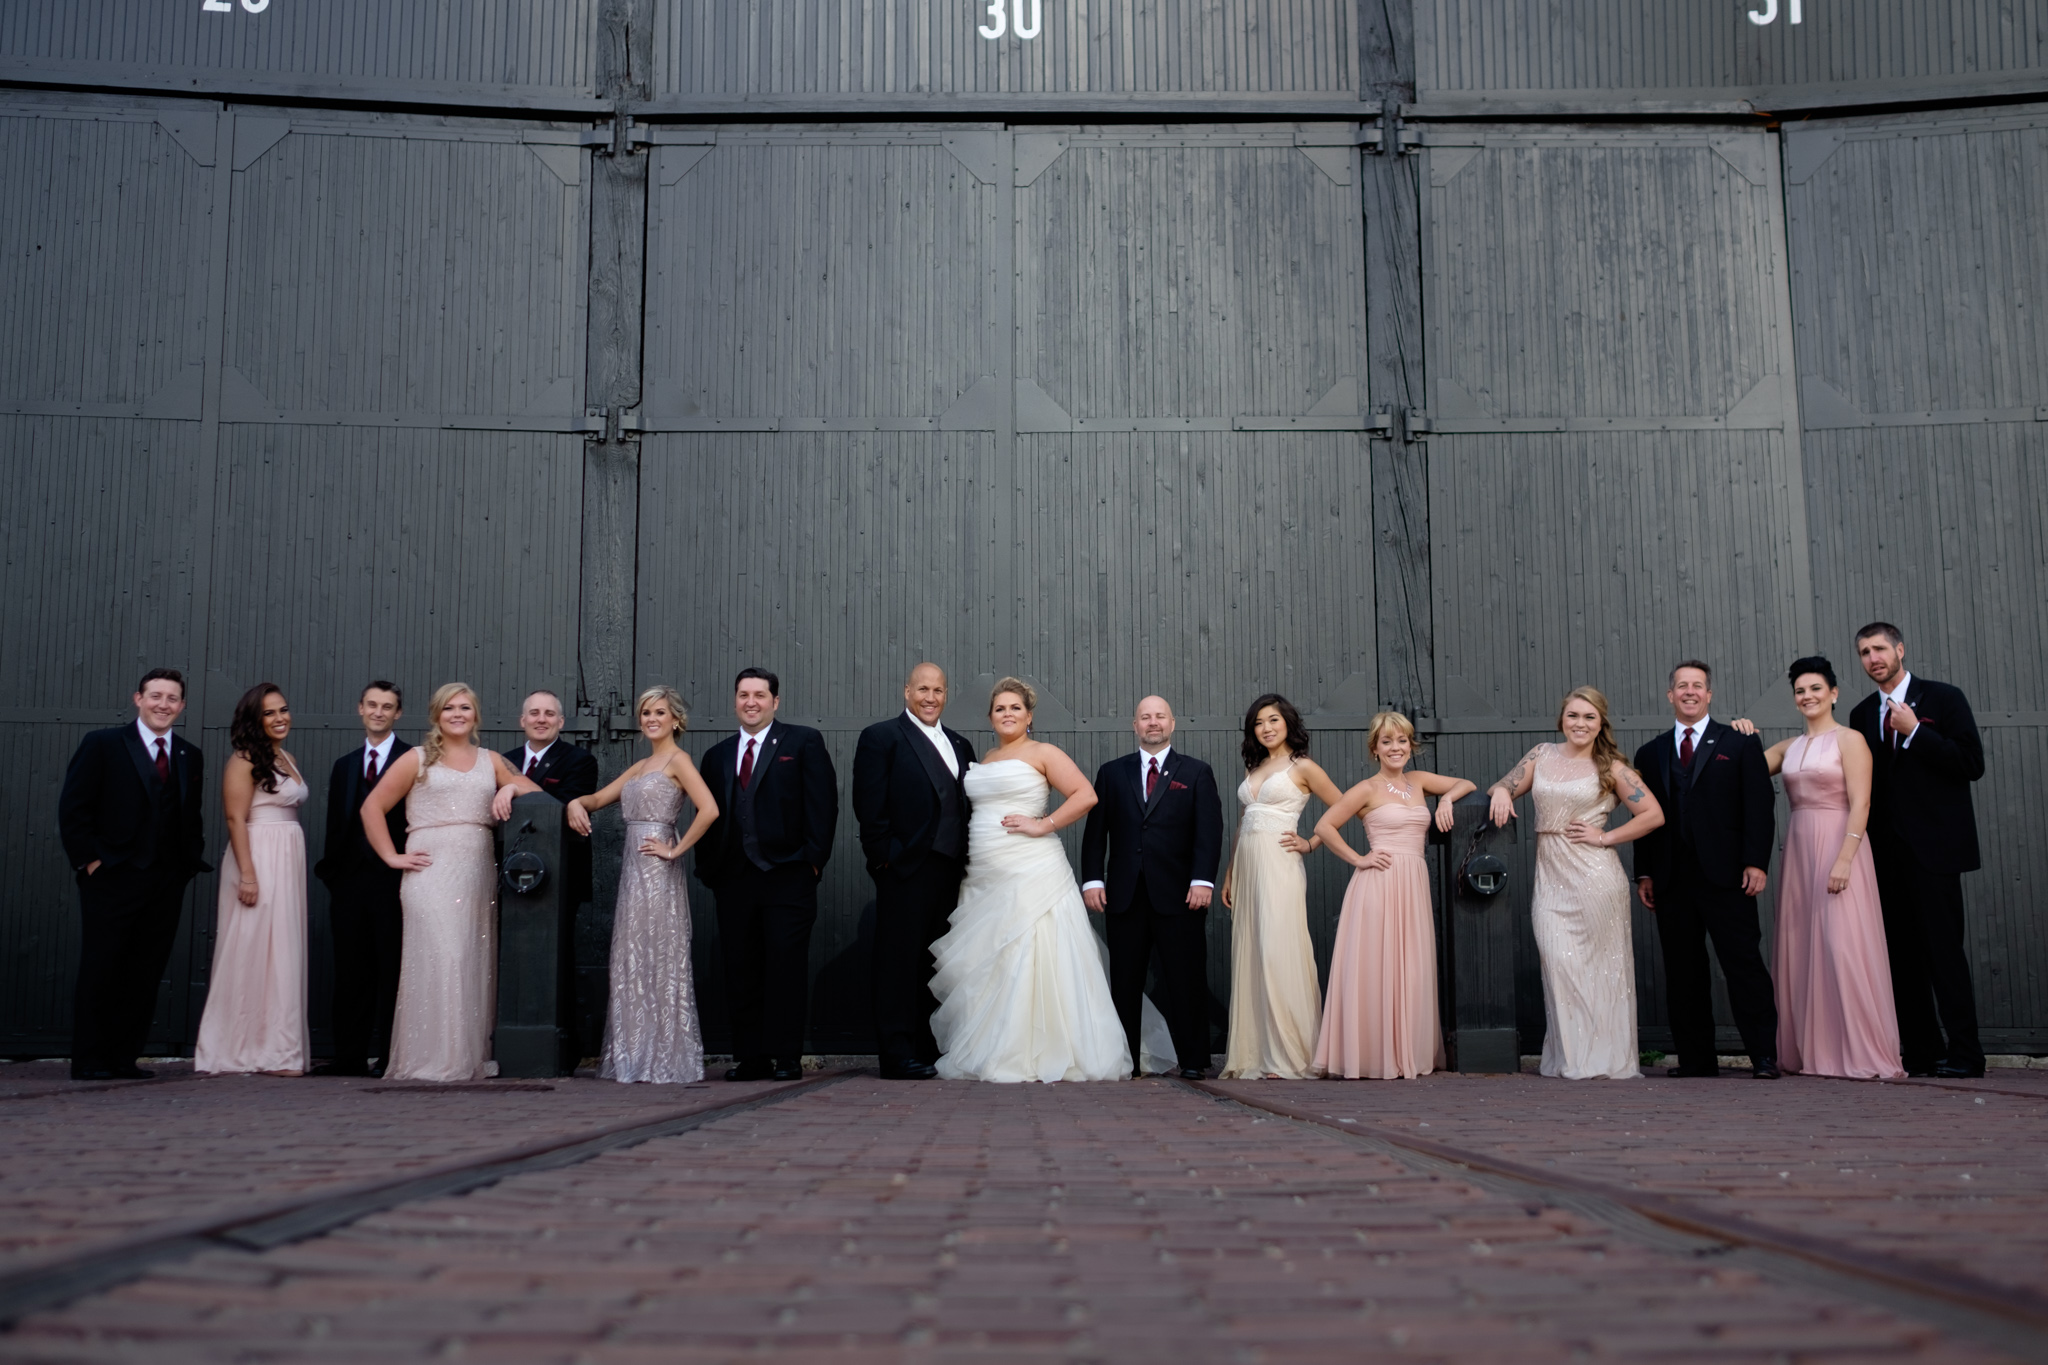  A photograph of the wedding party from Savannah + Bernie's wedding at the SteamWhistle Brewery in downtown Toronto.&nbsp; 